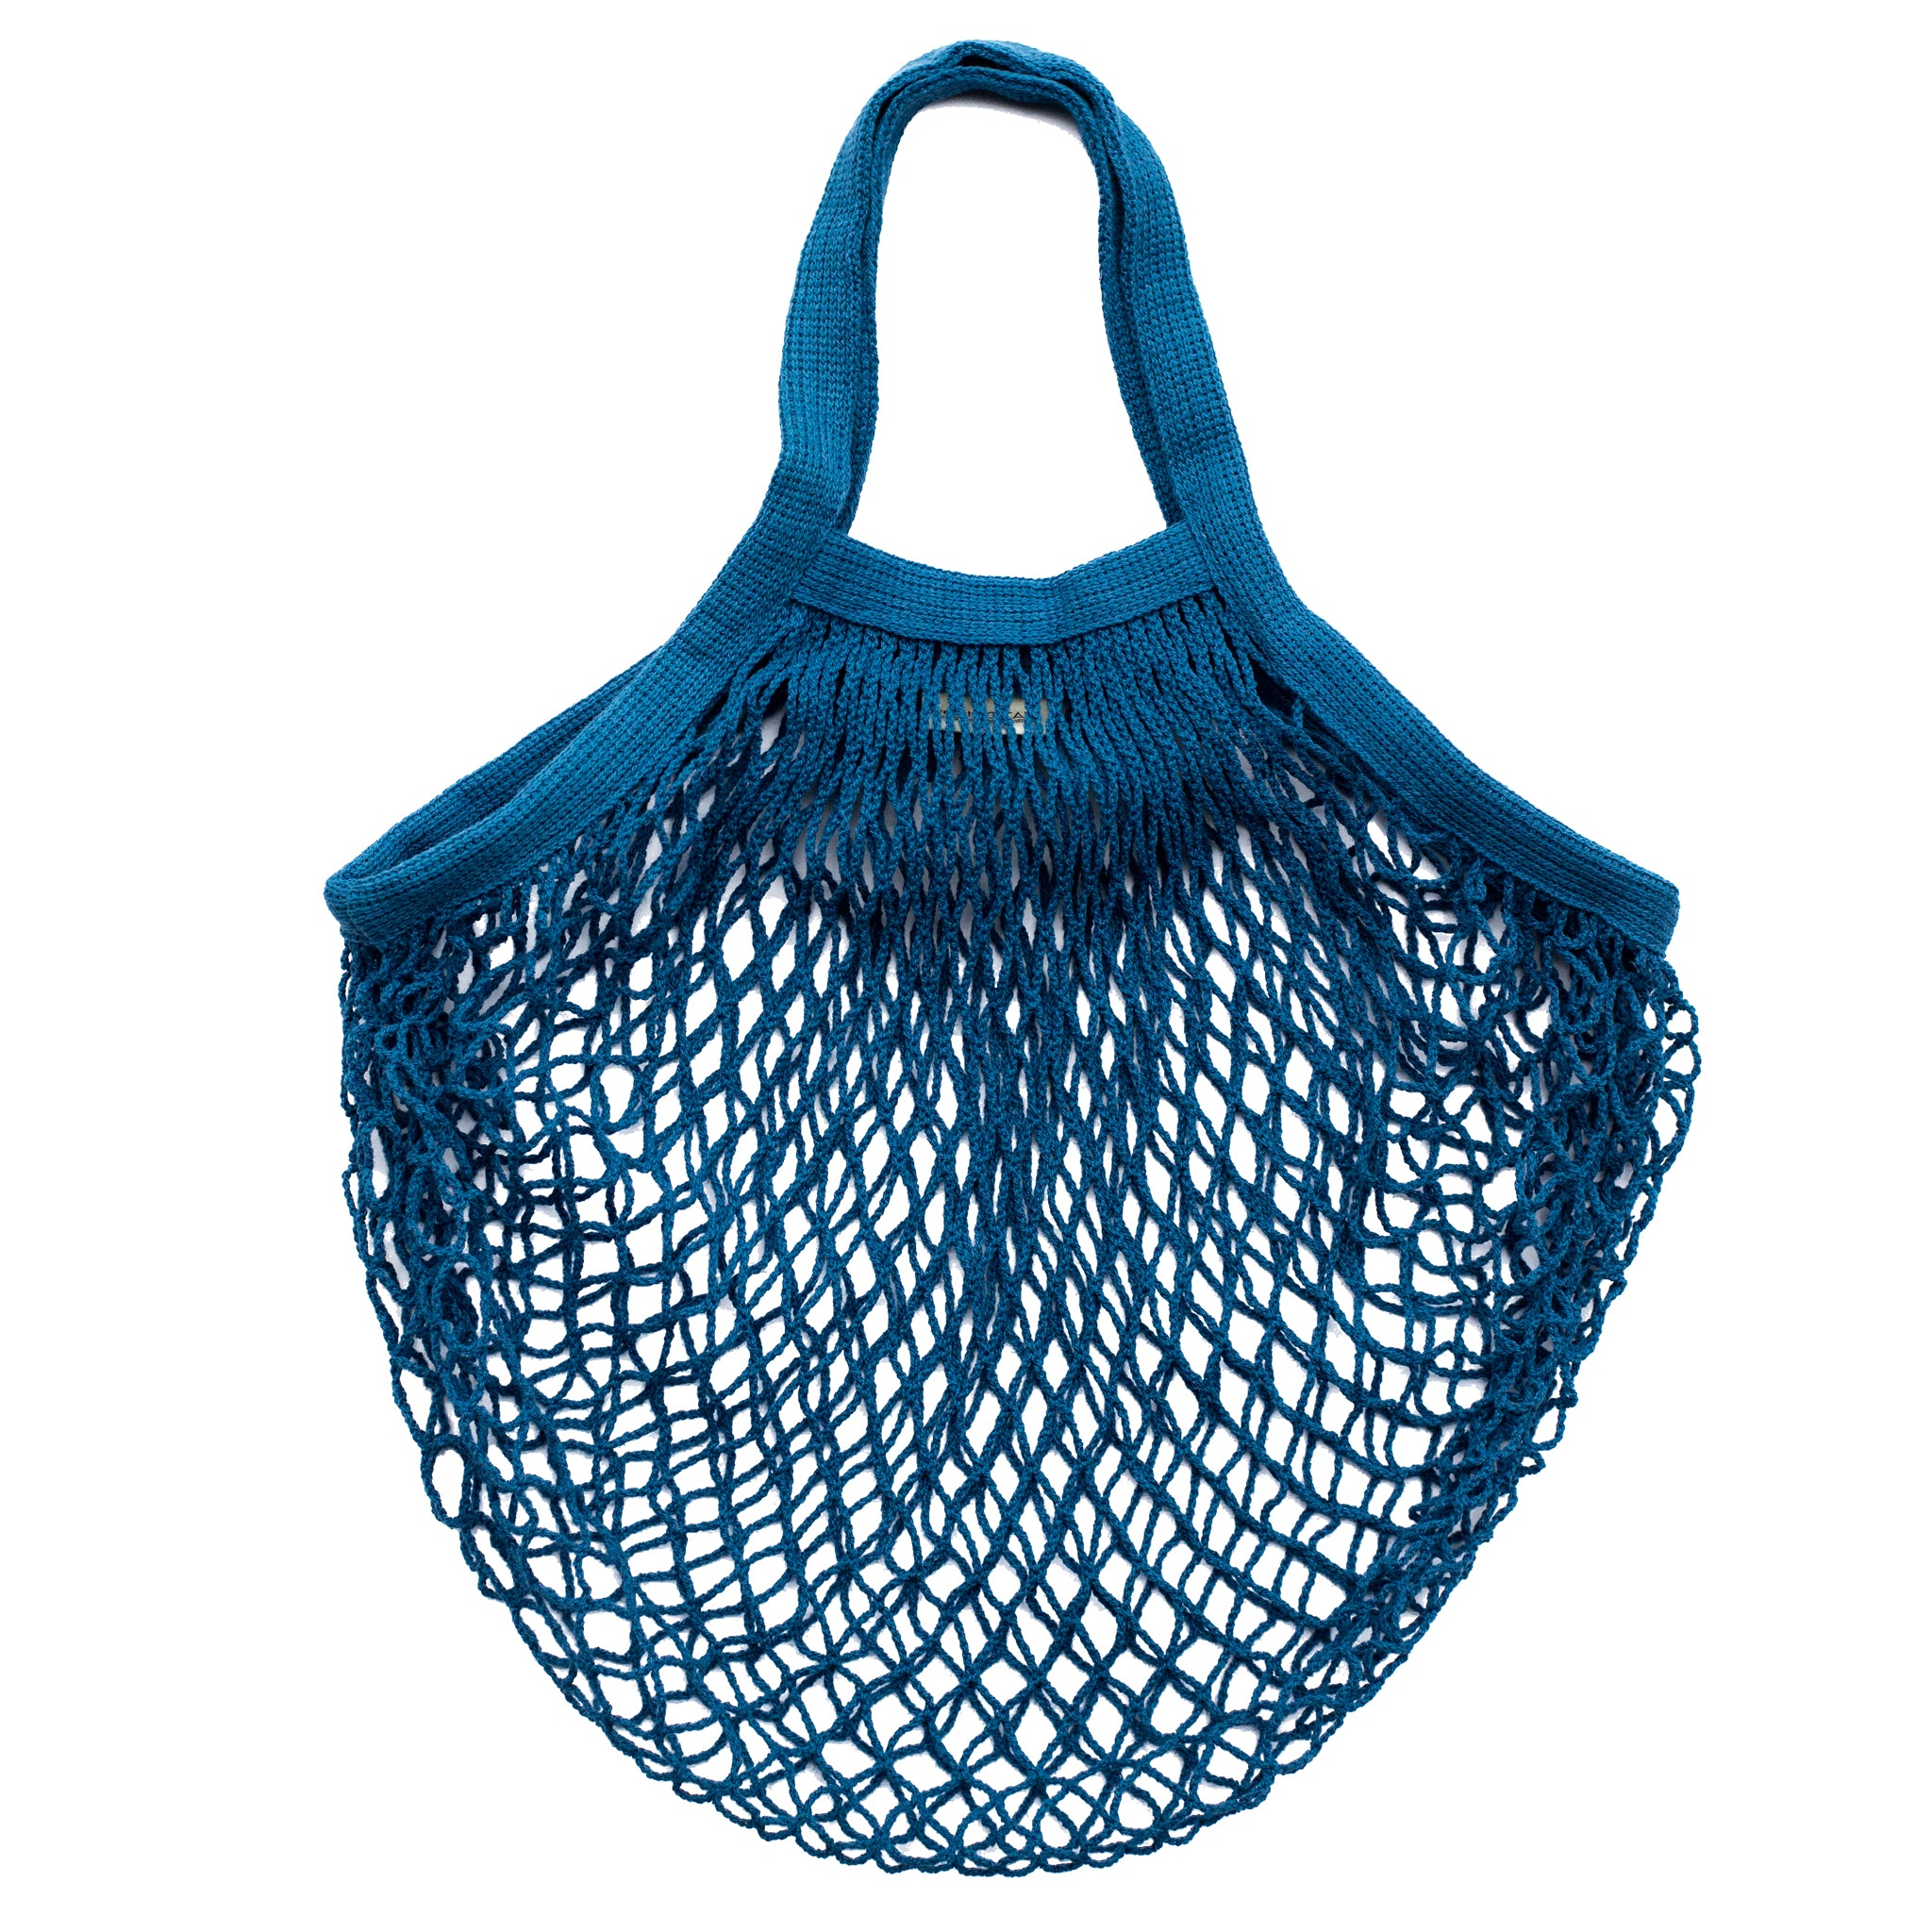 Plastic-Free String Bag - 2 Colors | Free The Ocean Gray Blue